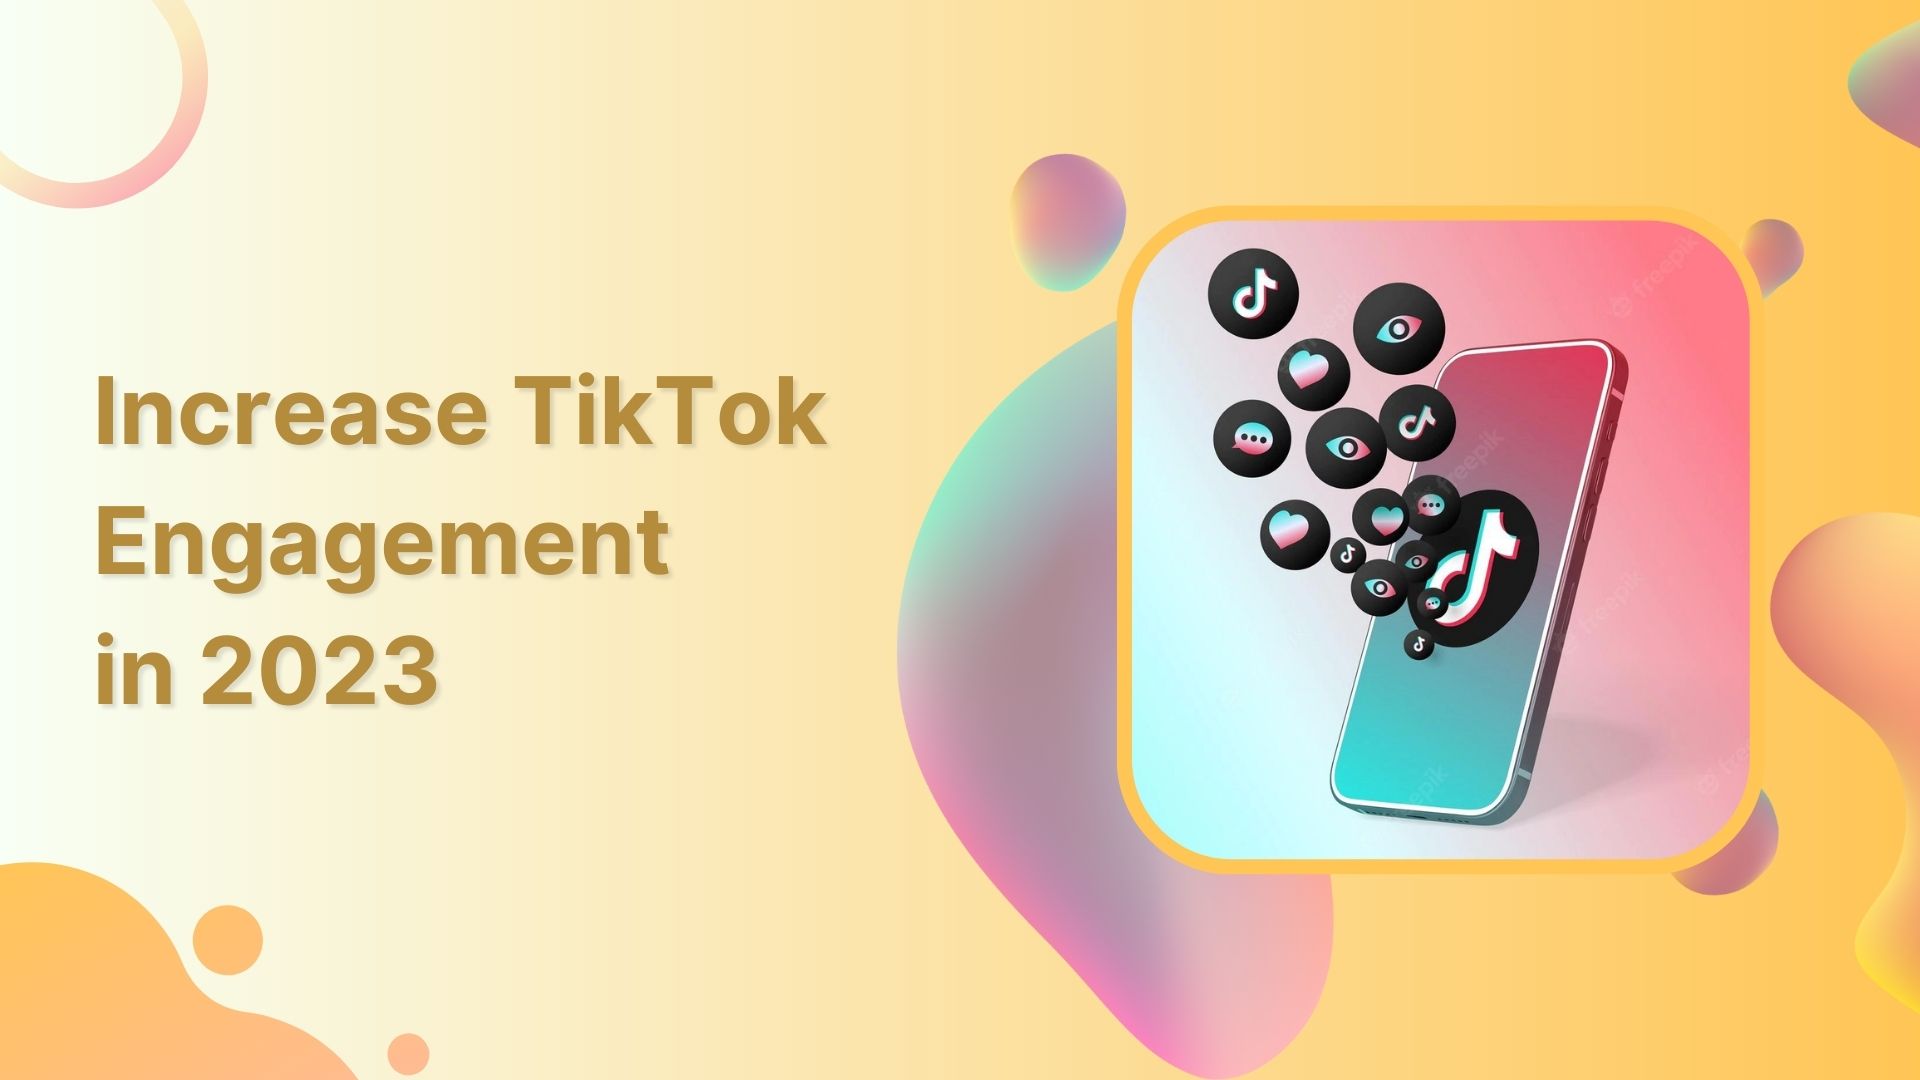 How to increase TikTok engagement in 2023?